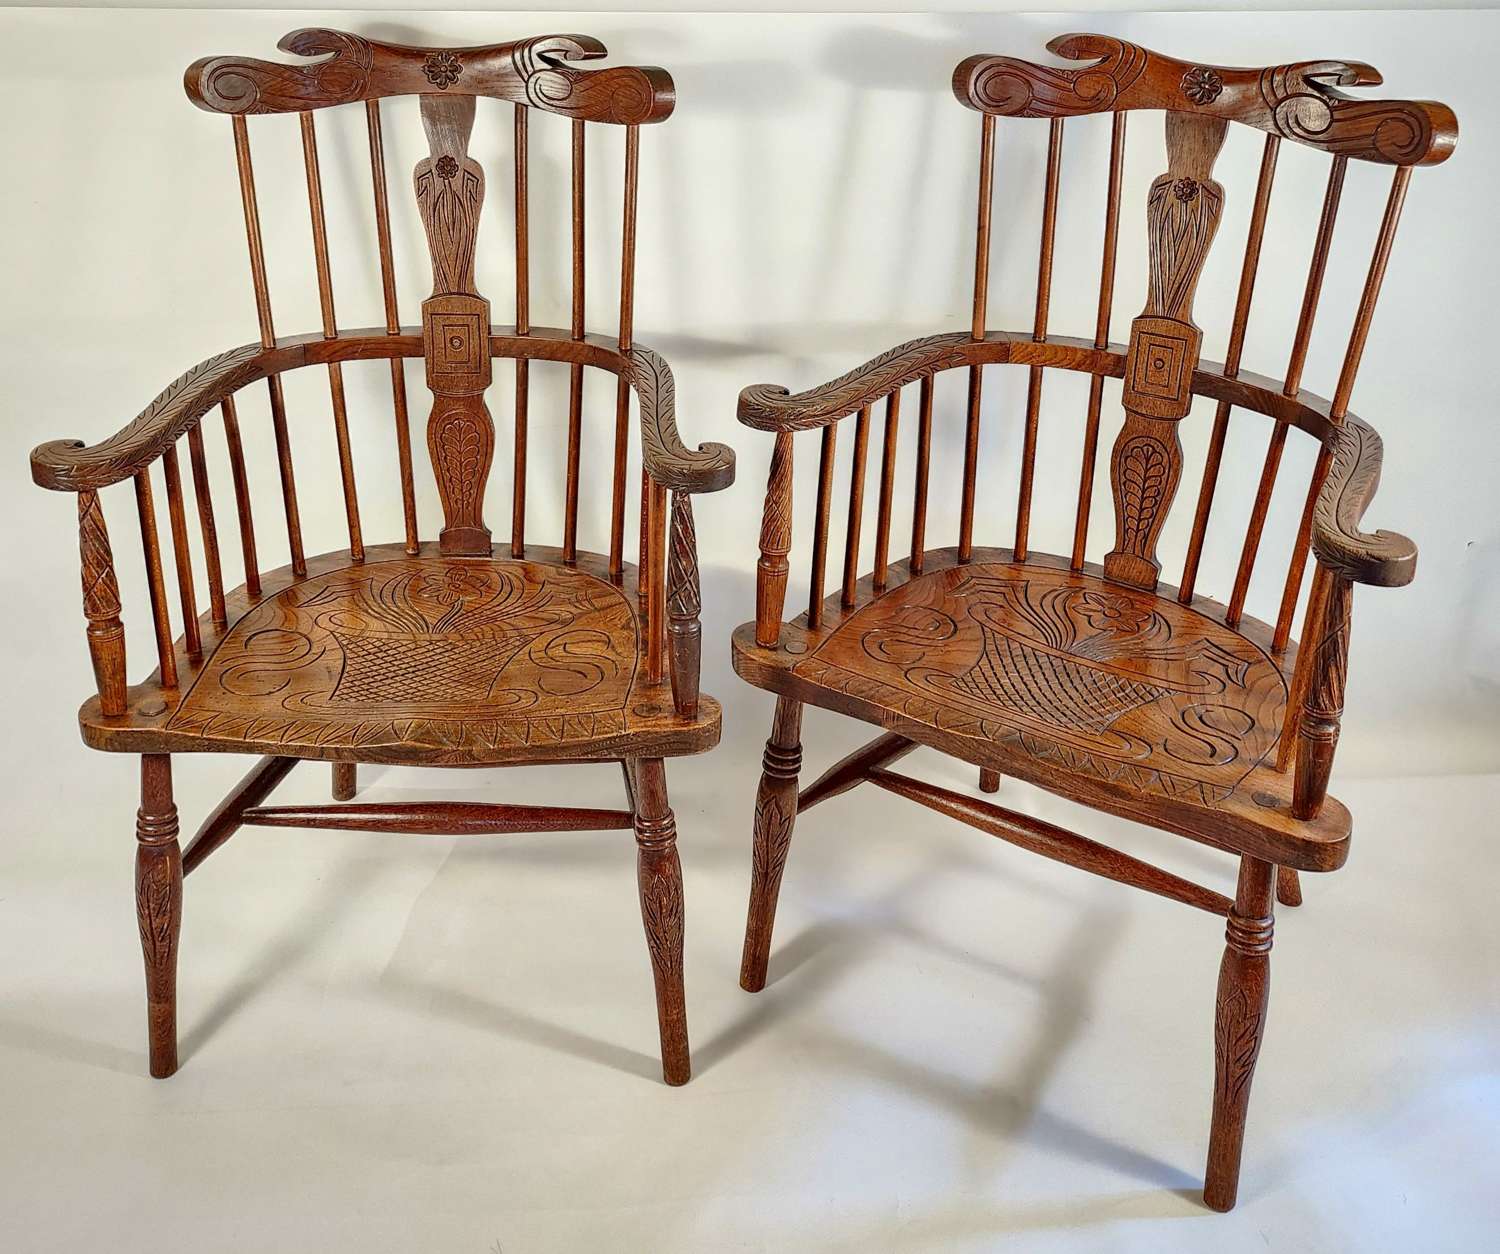 Rare Pair of Windsor Chairs